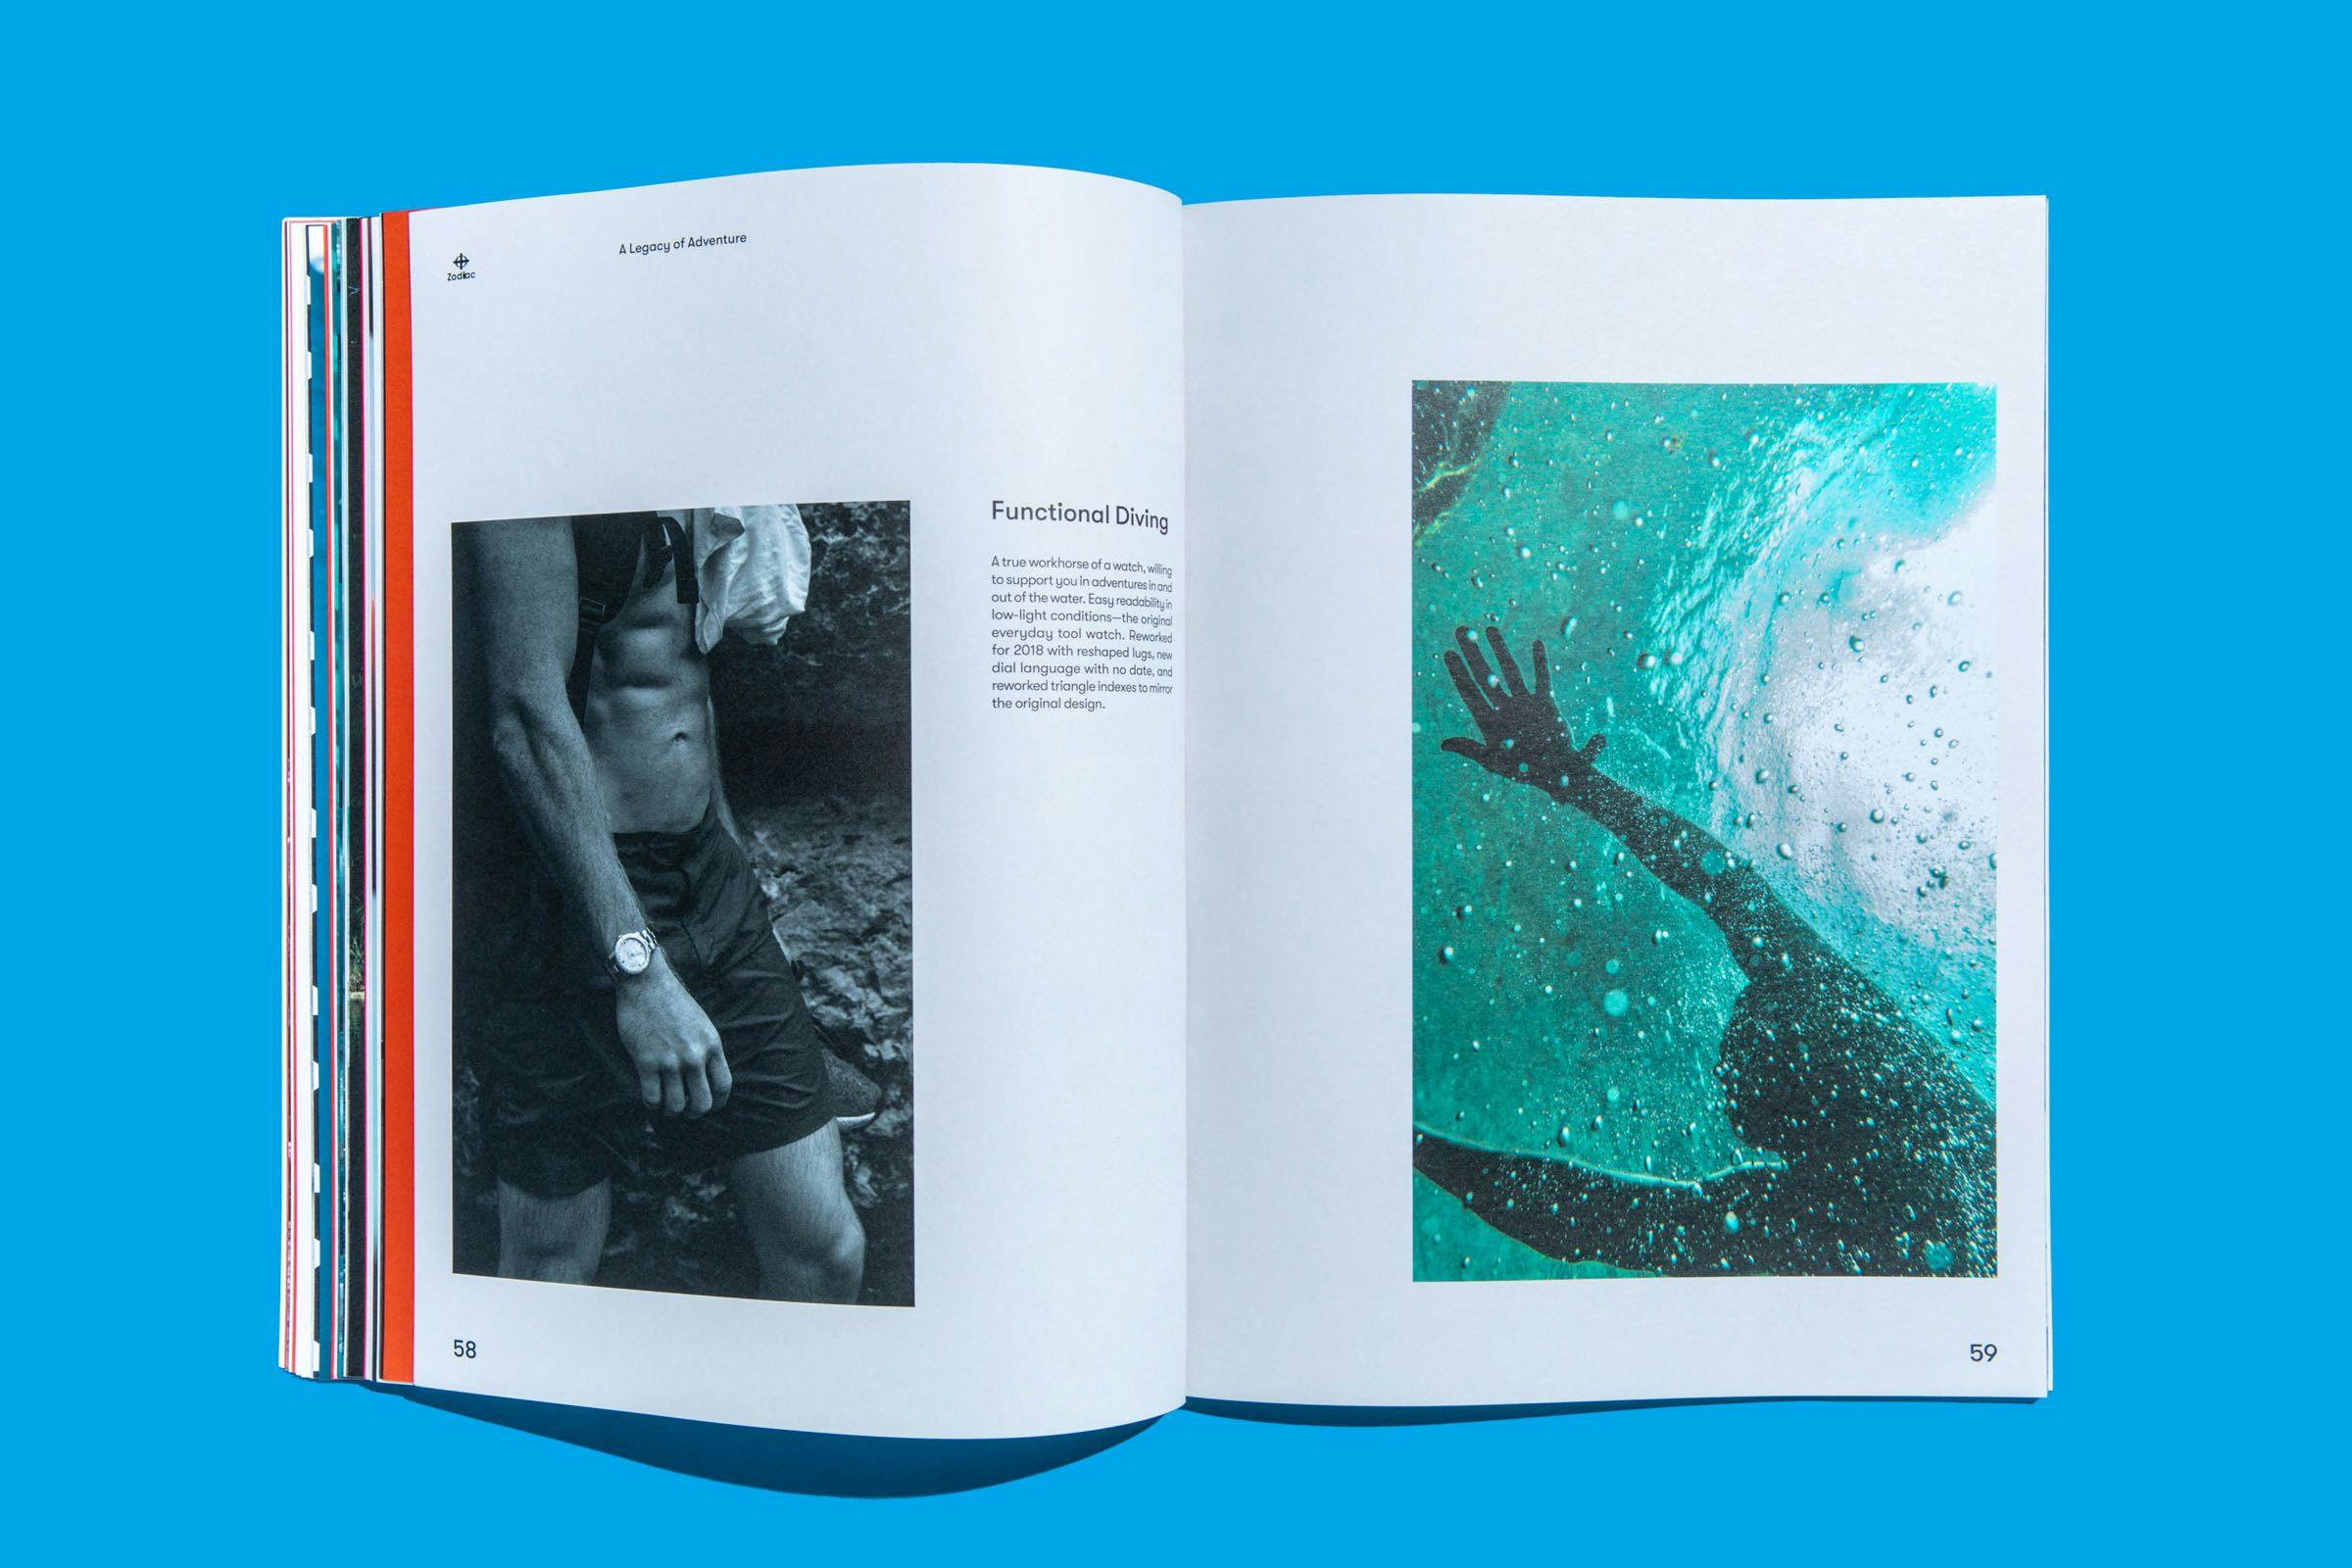 Photos from pages in the Zodiac Watches: Brand Book showing someone in swimwear and an individual swimming